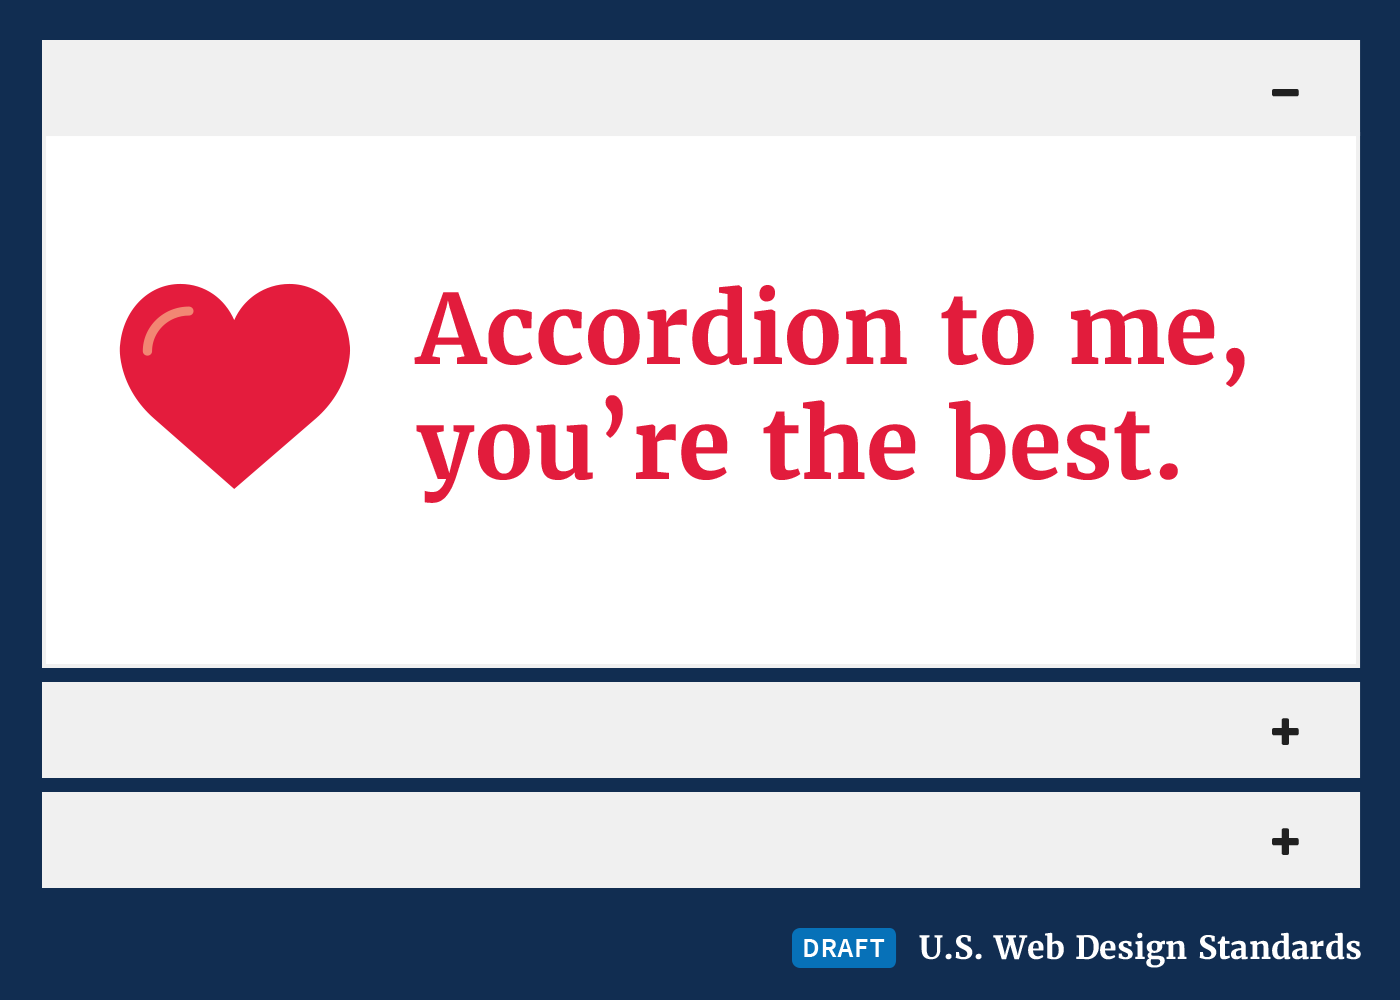 The draft web standards accordion with a valentines message exposed.